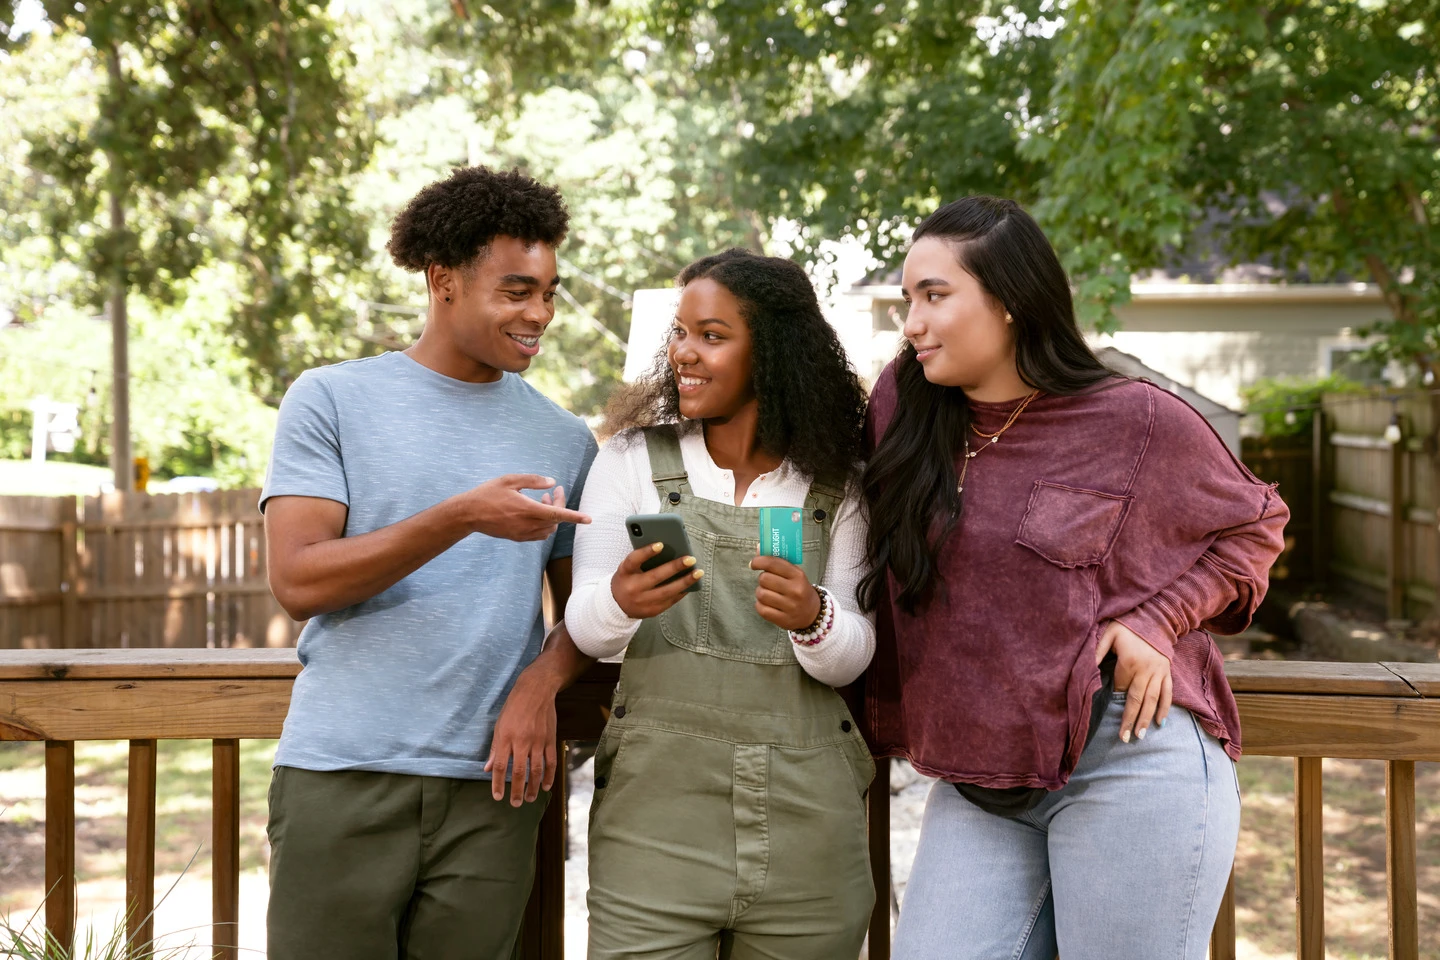 Teens outside hanging in a group of 3 discussing Greenlight card and debit card with Savings app